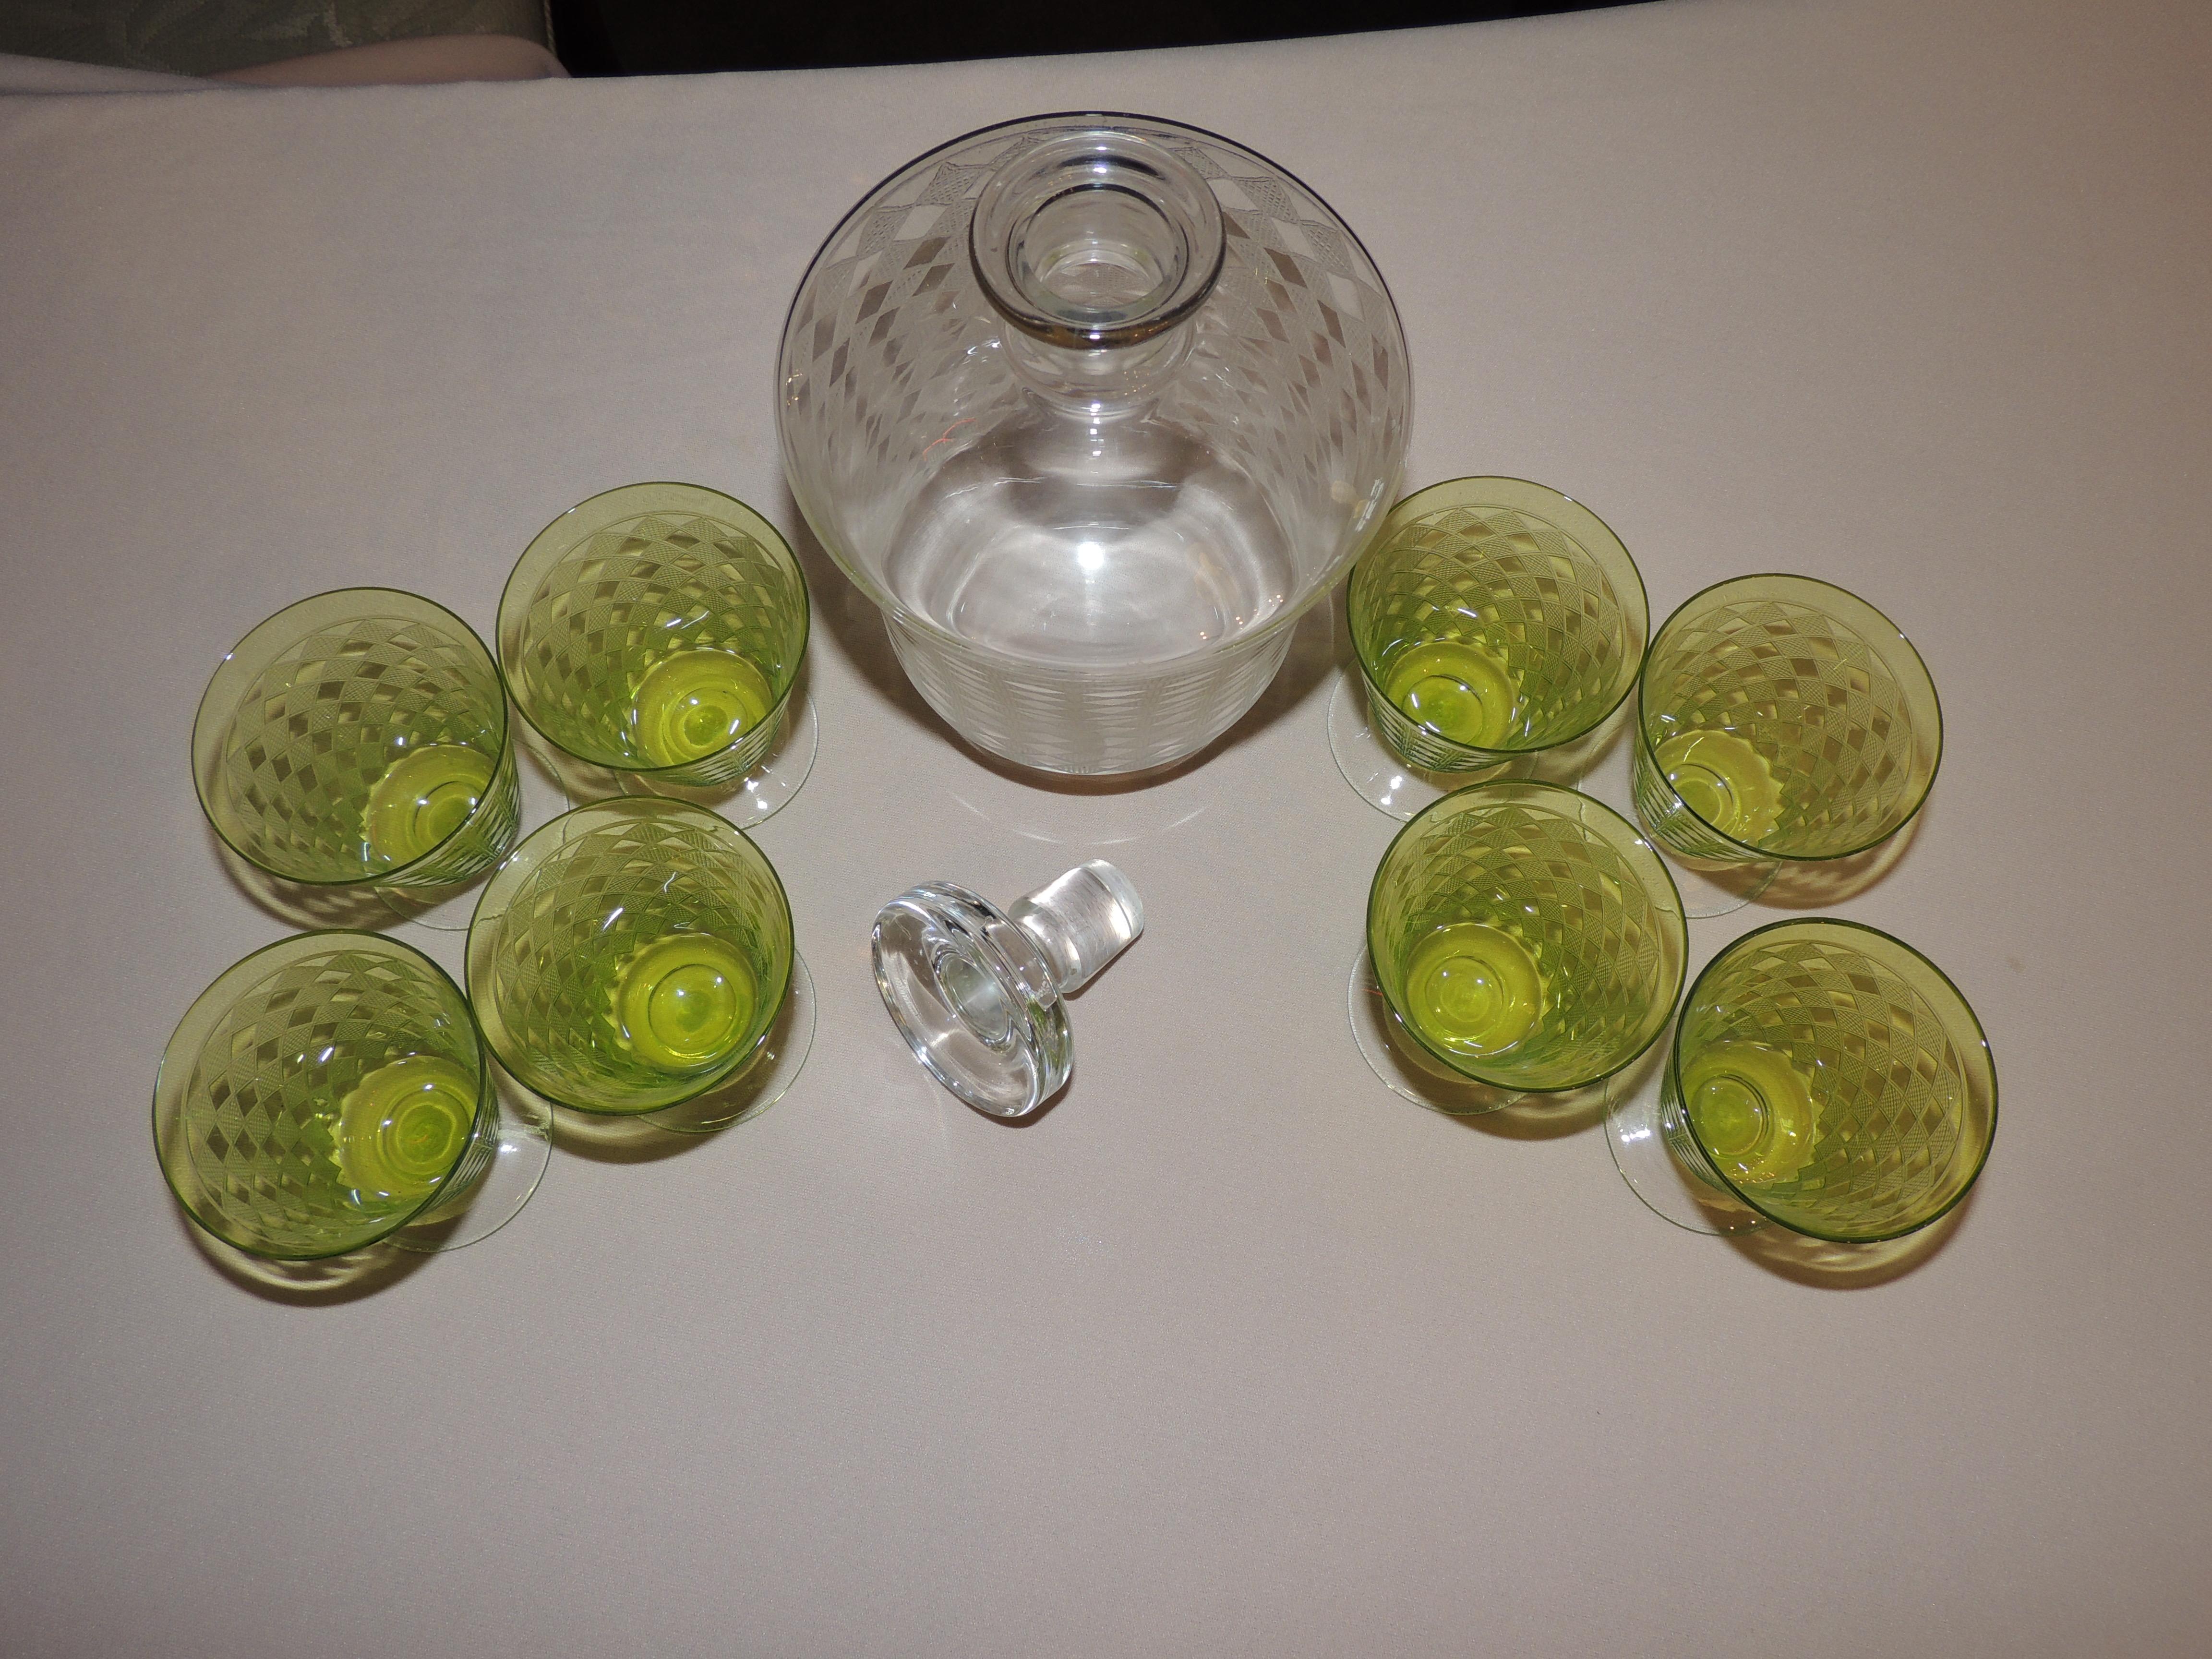 French Baccarat Art Deco Decanter and Green Glasses